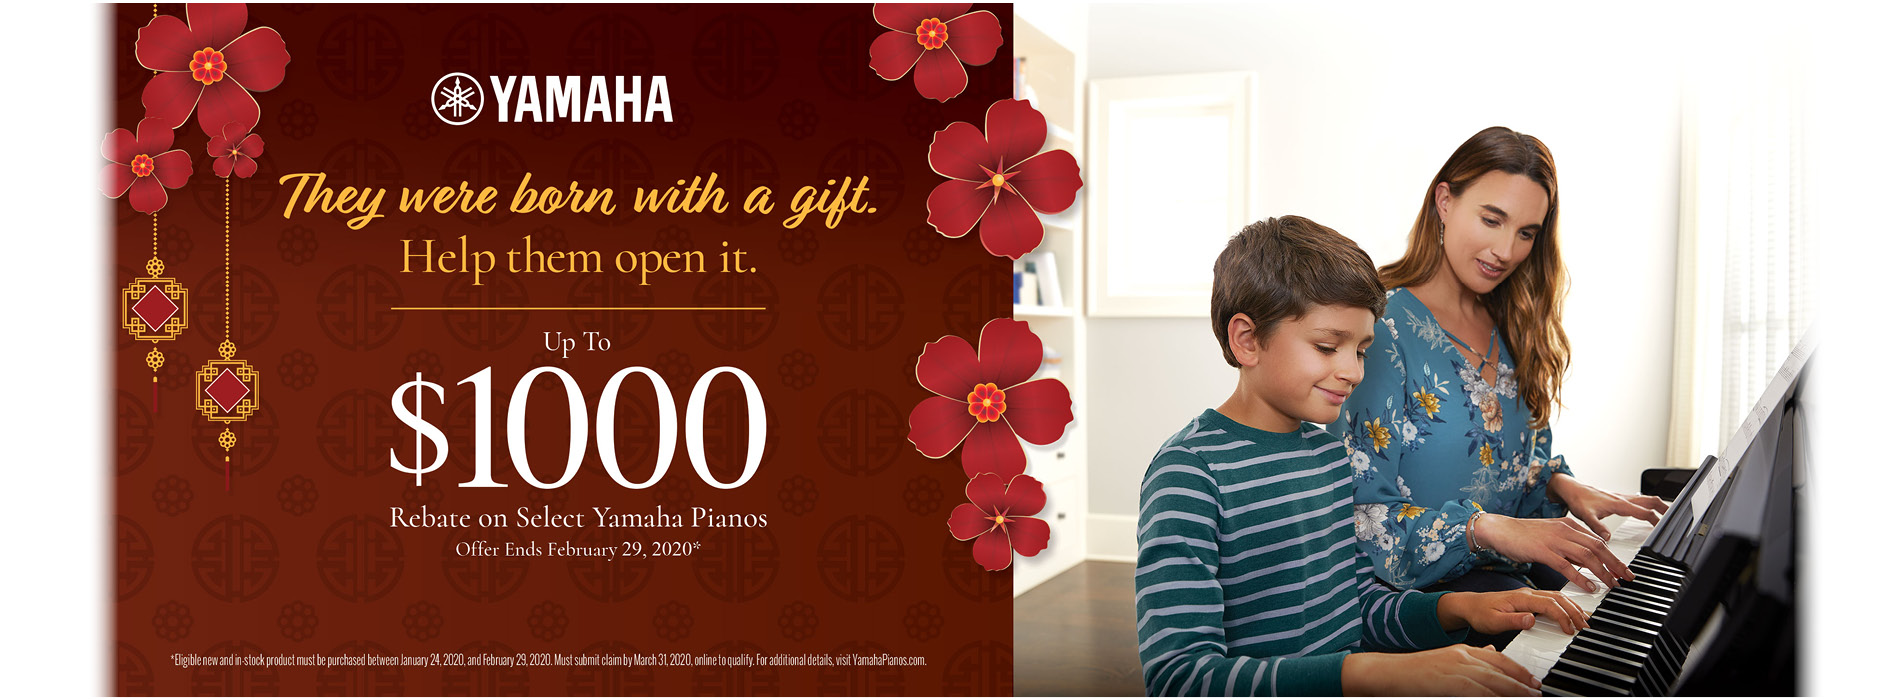 get-instant-factory-rebates-of-up-to-1-000-on-new-yamaha-pianos